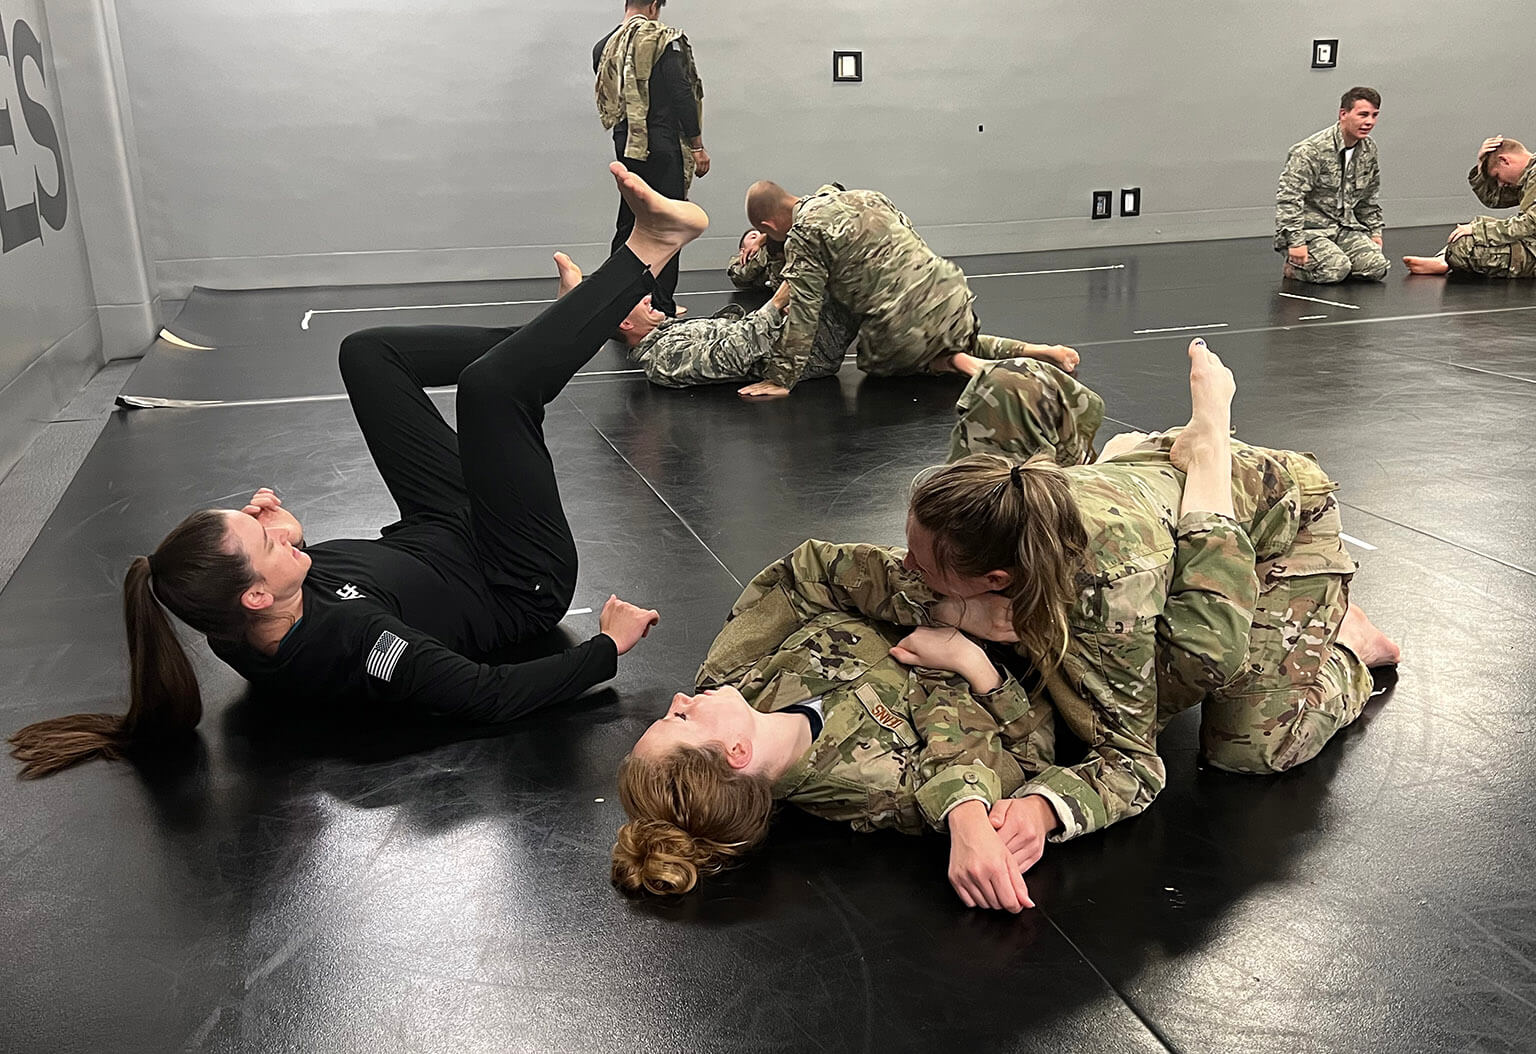 Second class cadets practice hand-to-hand combat techniques during Combatives II at the U.S. Air Force Academy